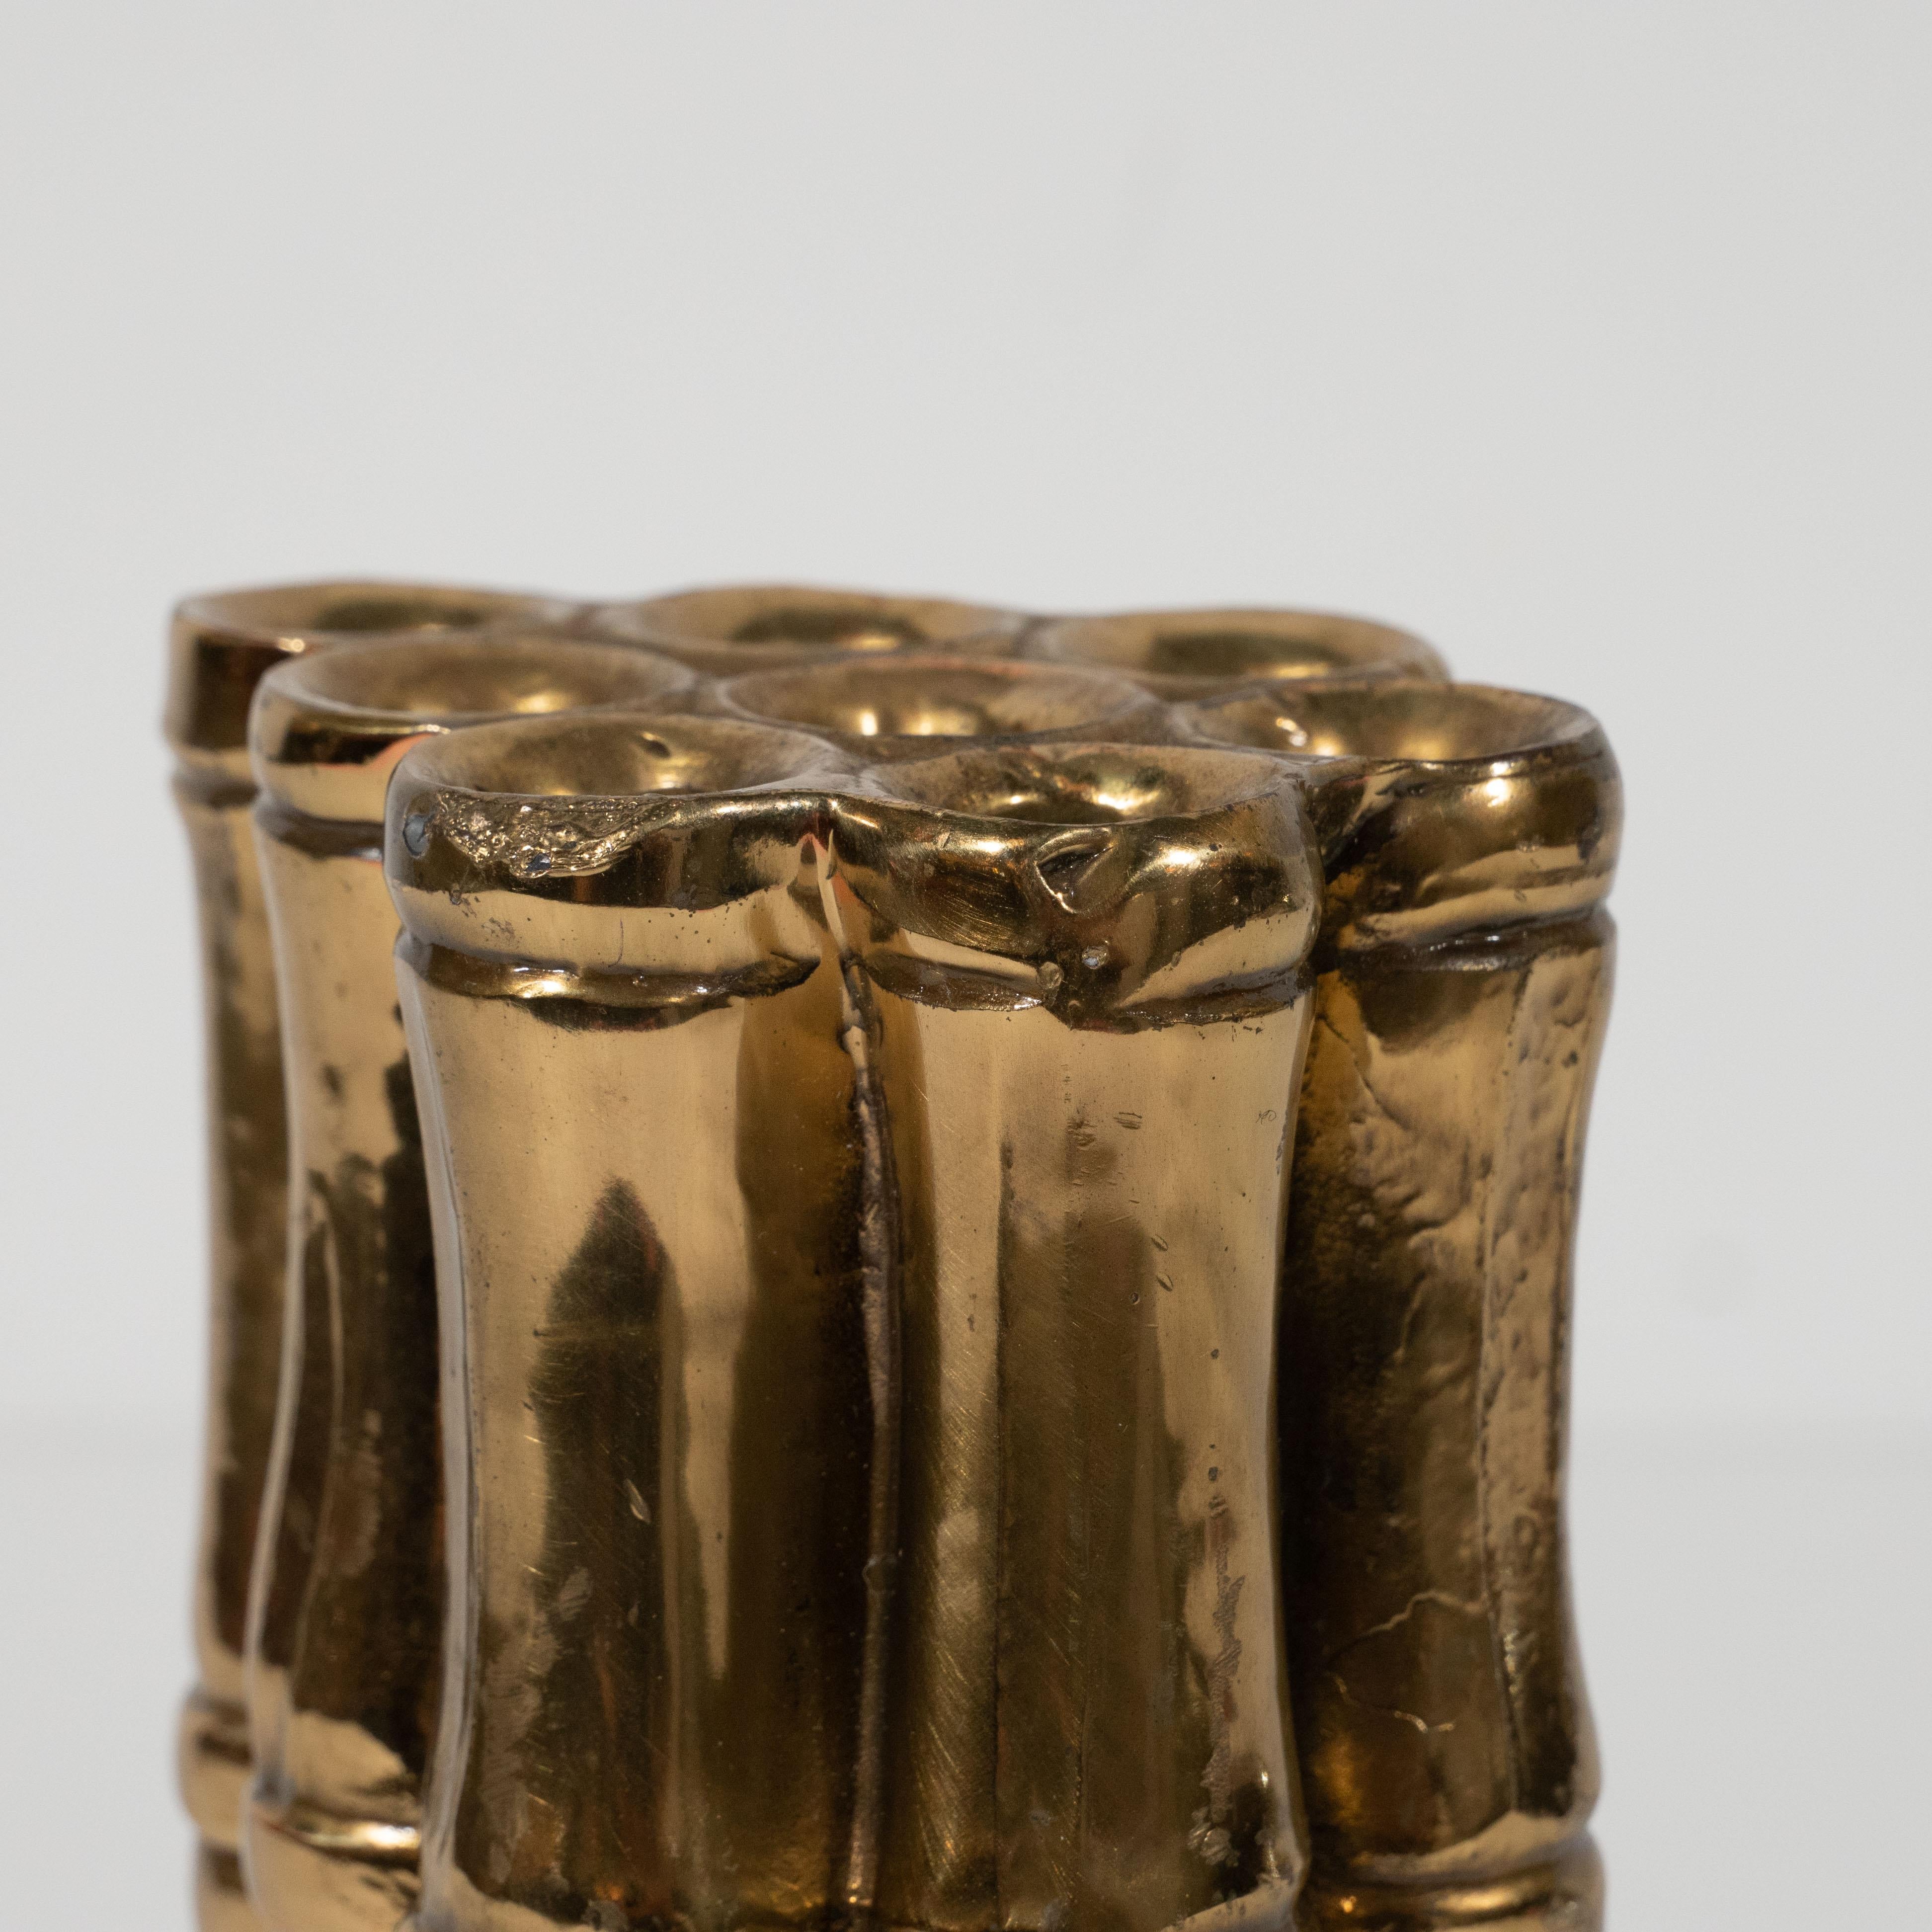 This refined flower holder was realized in the United States, circa 1970. It features eight conjoined cylindrical forms of stylized cane bamboo segments with three sets of incised banding (top, bottom, and center) details representing their joints.